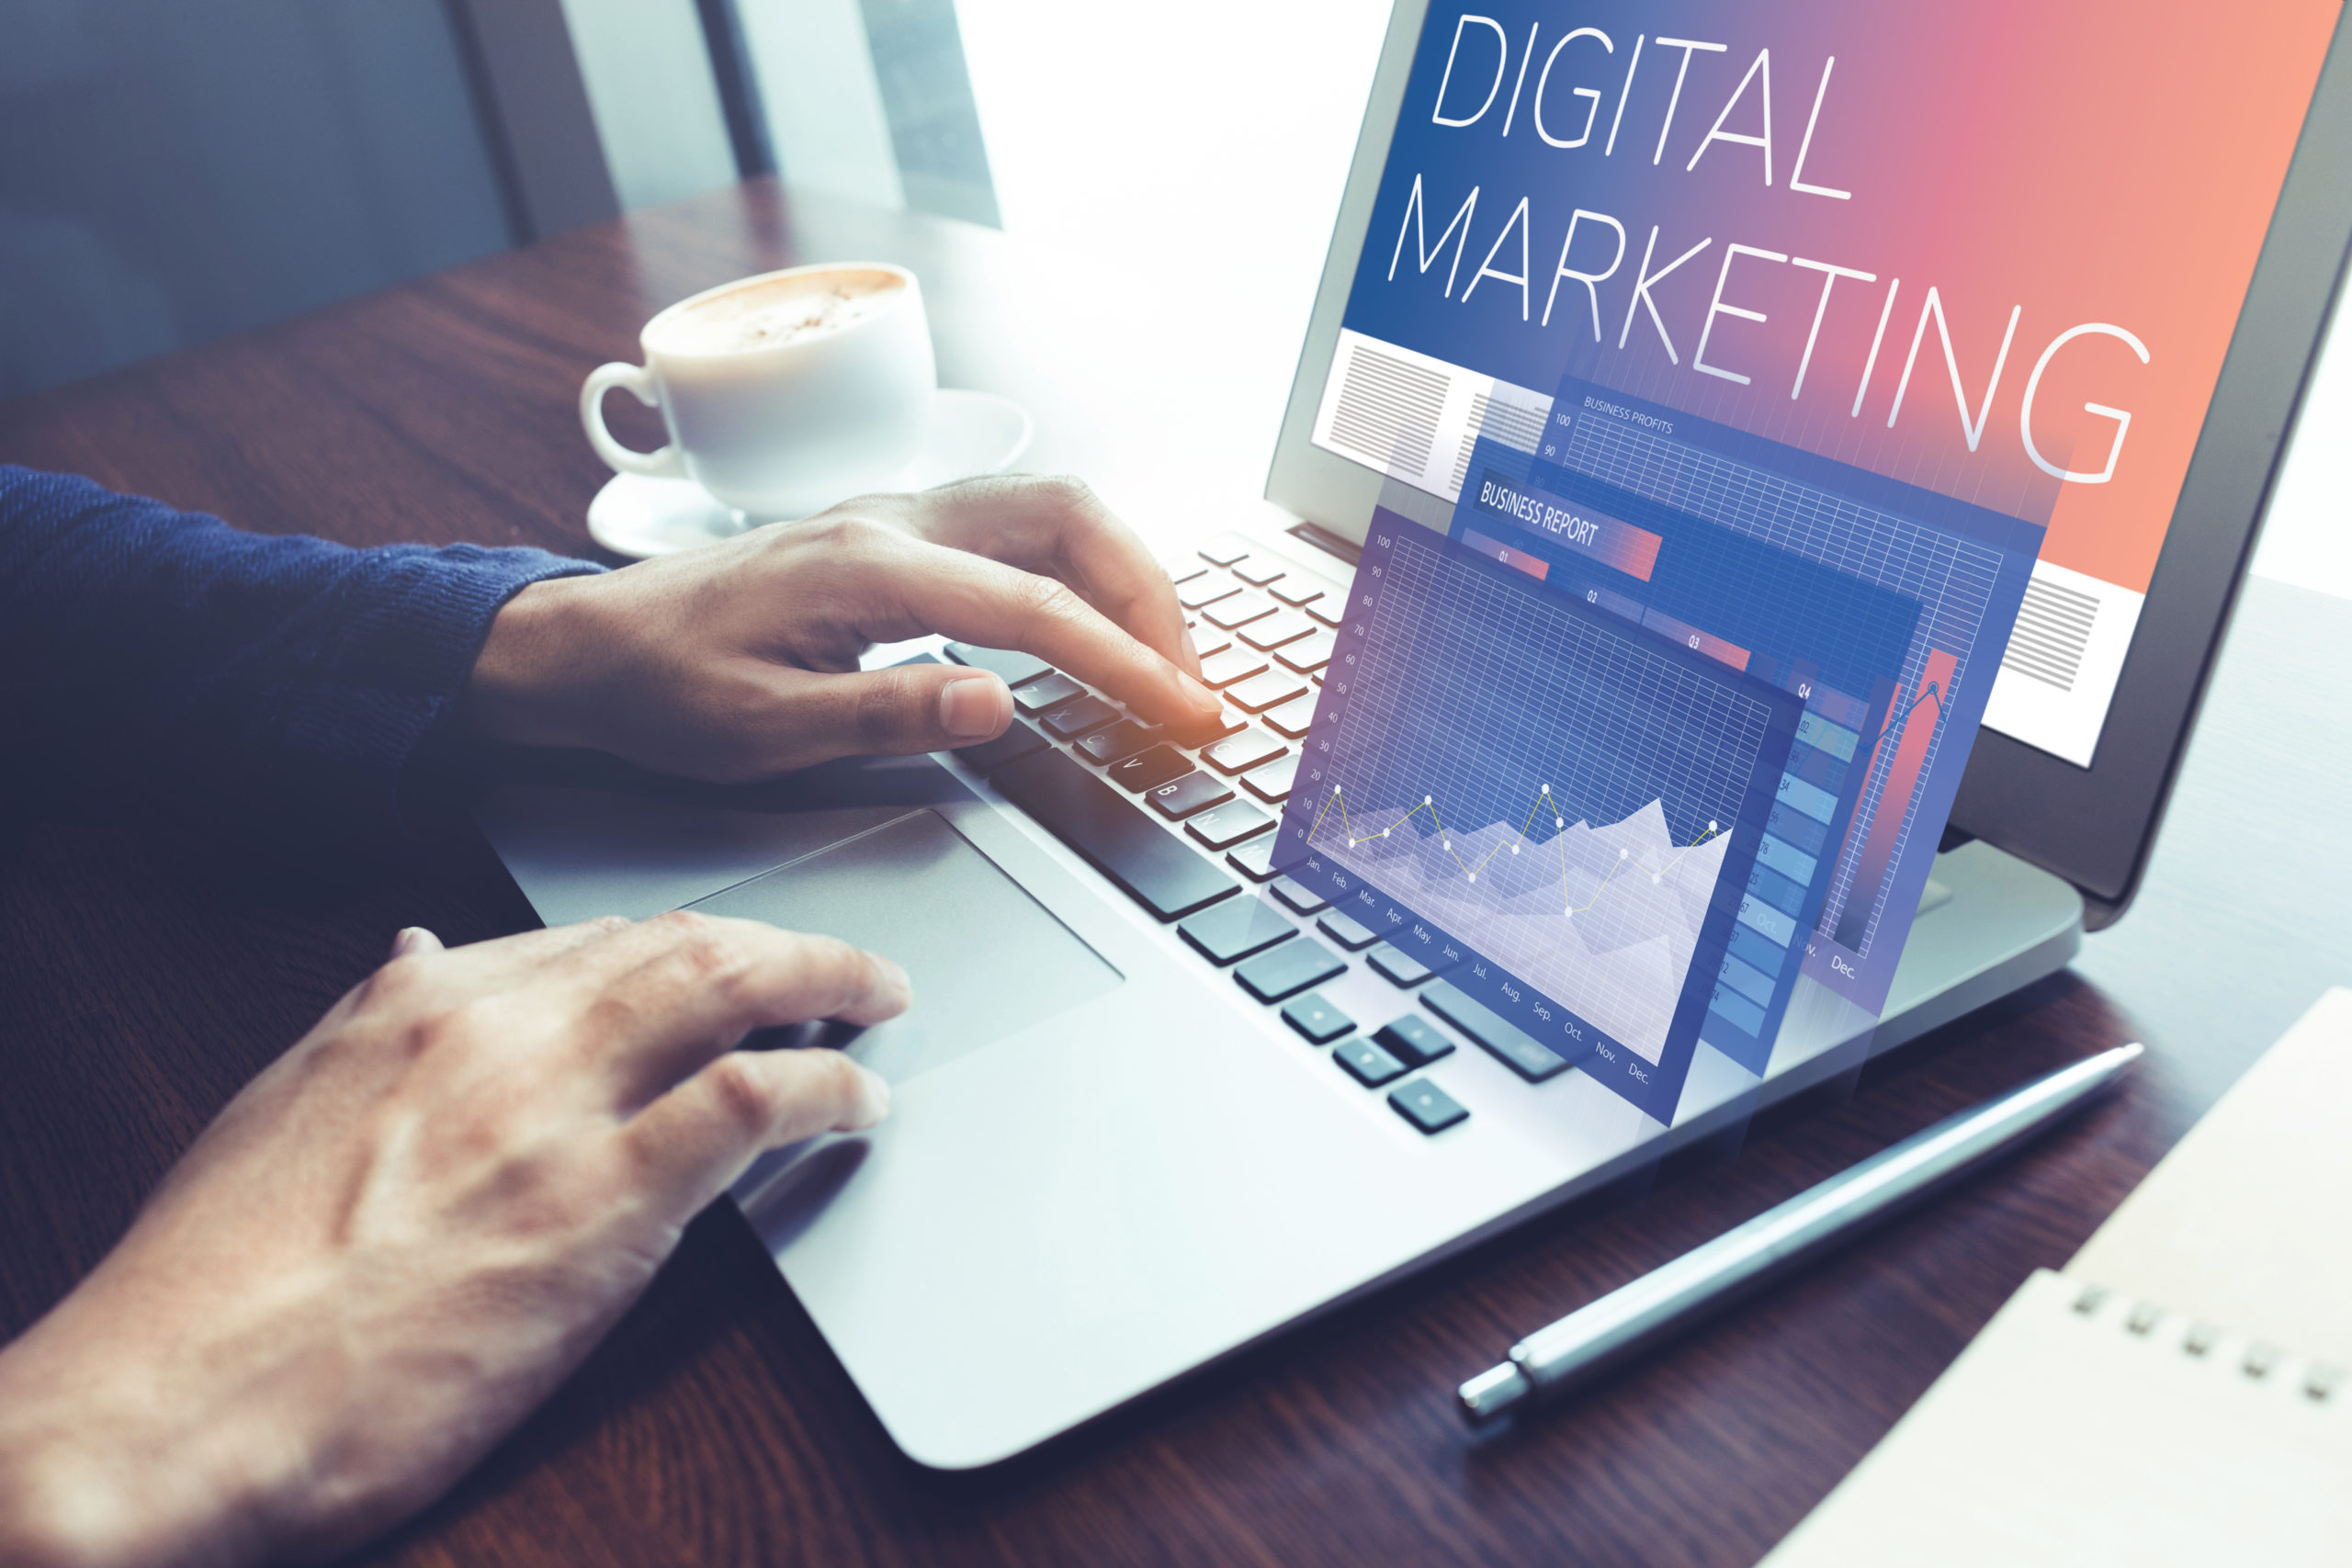 Digital Marketing Tools to Improve Your Business